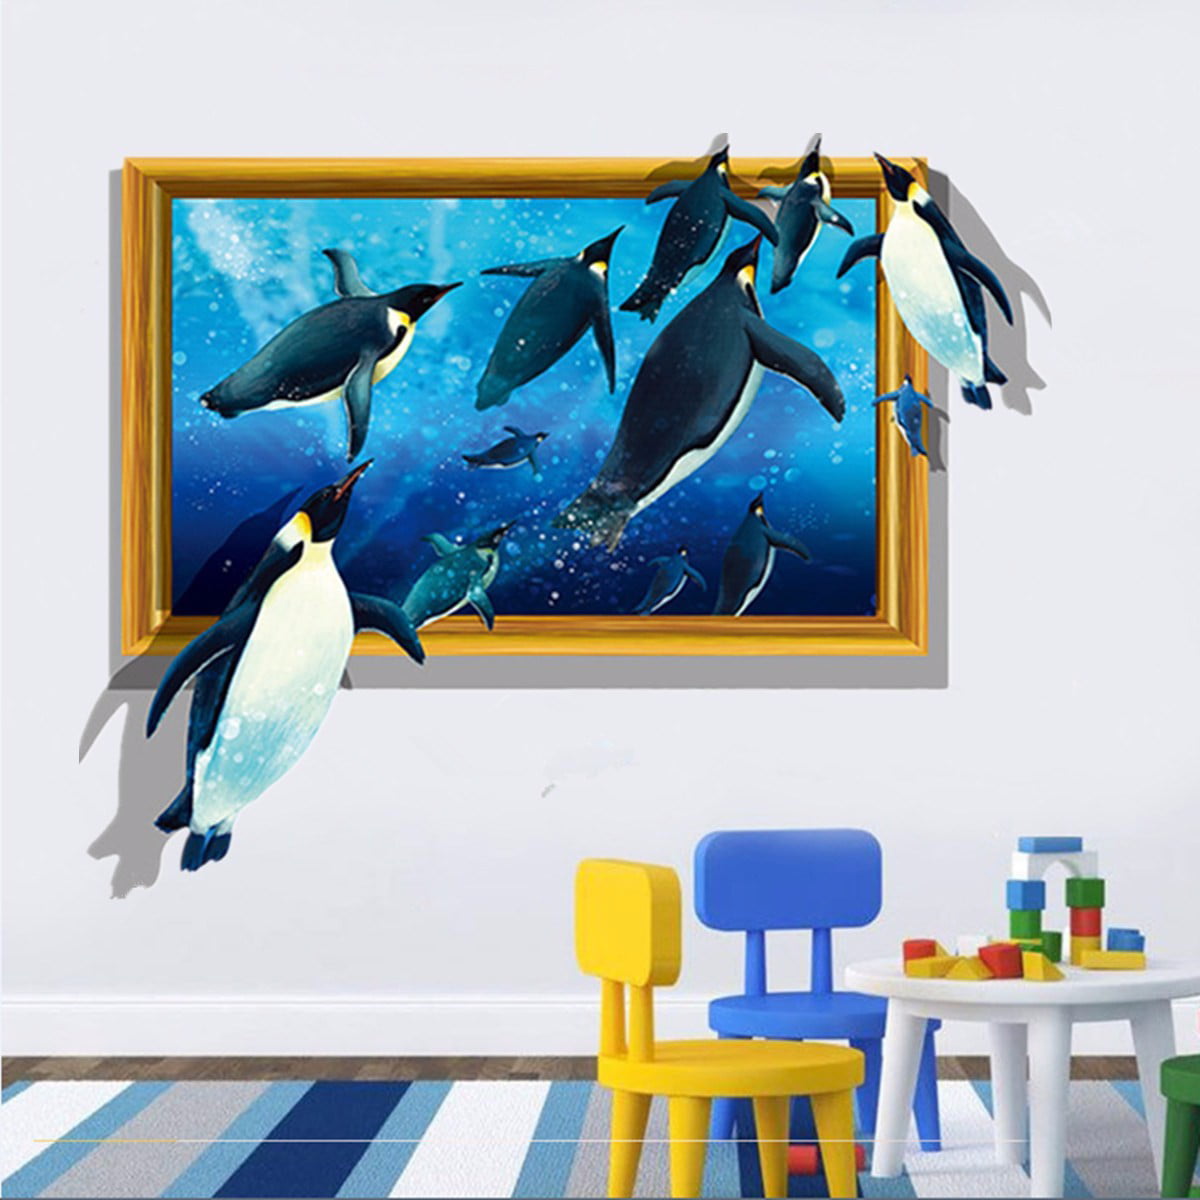 Details about   Self adhesive Door Wall wrap removable Peel & Stick Animals jumping Dolphins